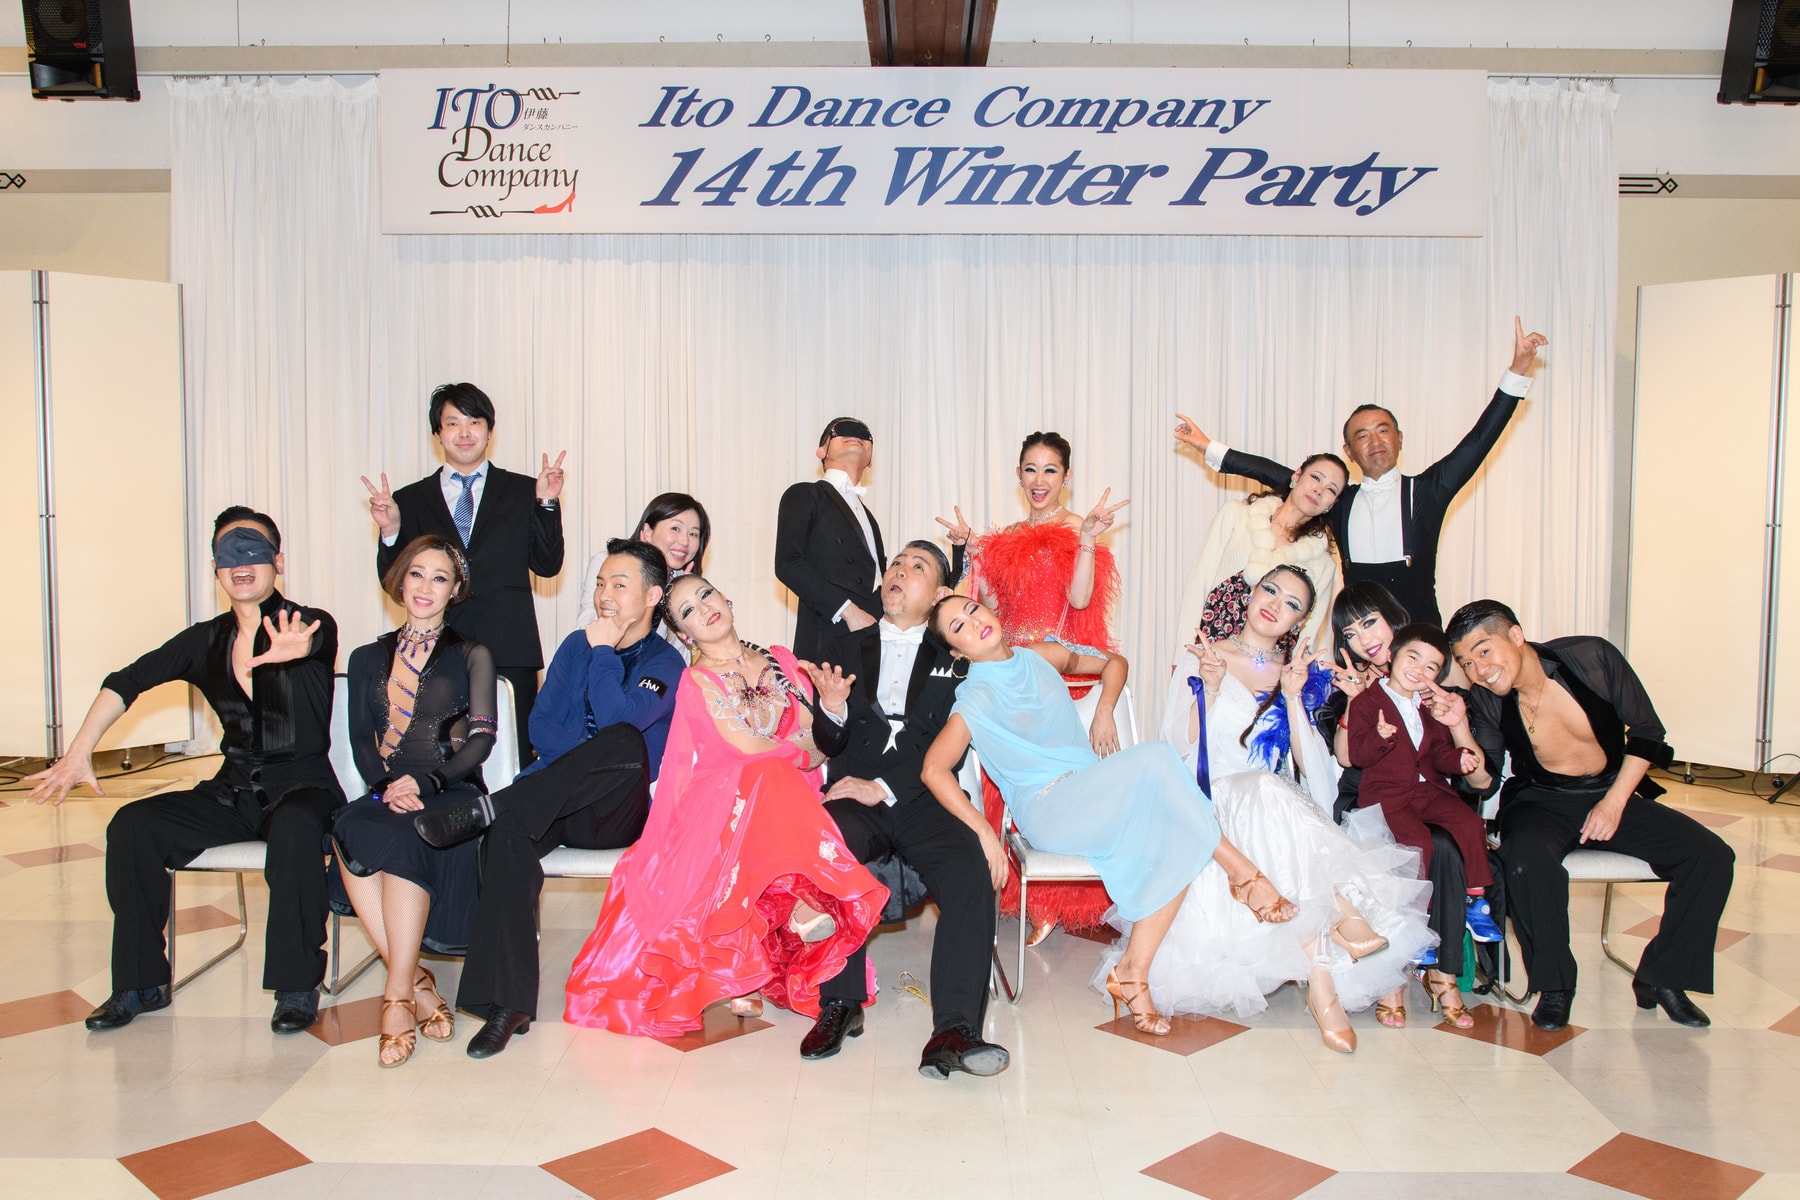 14th Winter Party